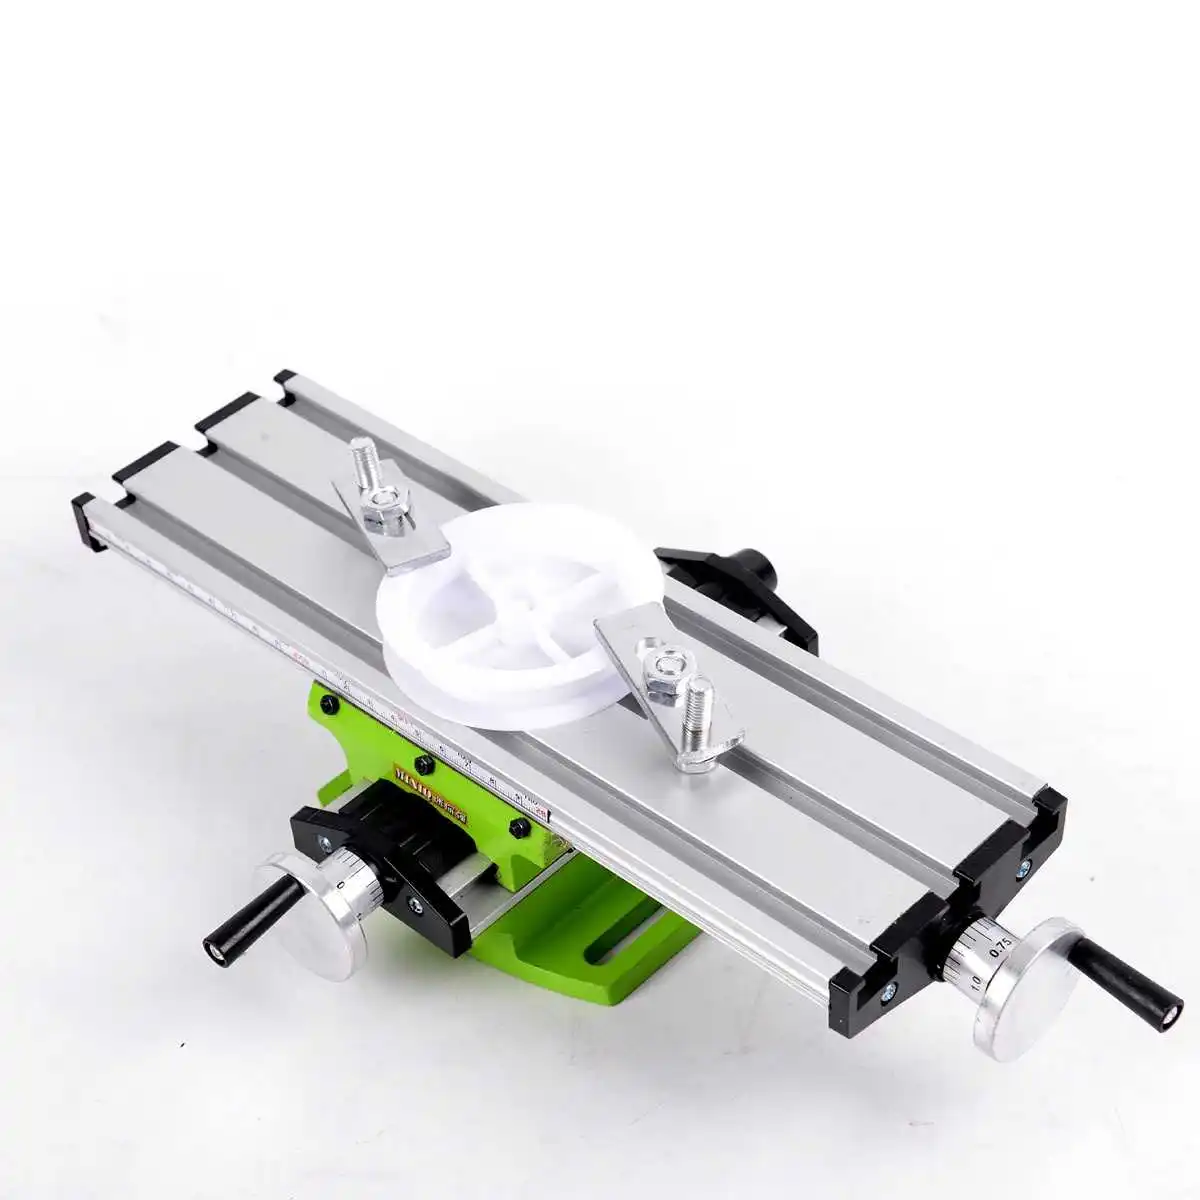 6300# Mini Workbench Table Multi-functional Cross Router Base Sliding Electric Drilling Machine Bench Insert Plate